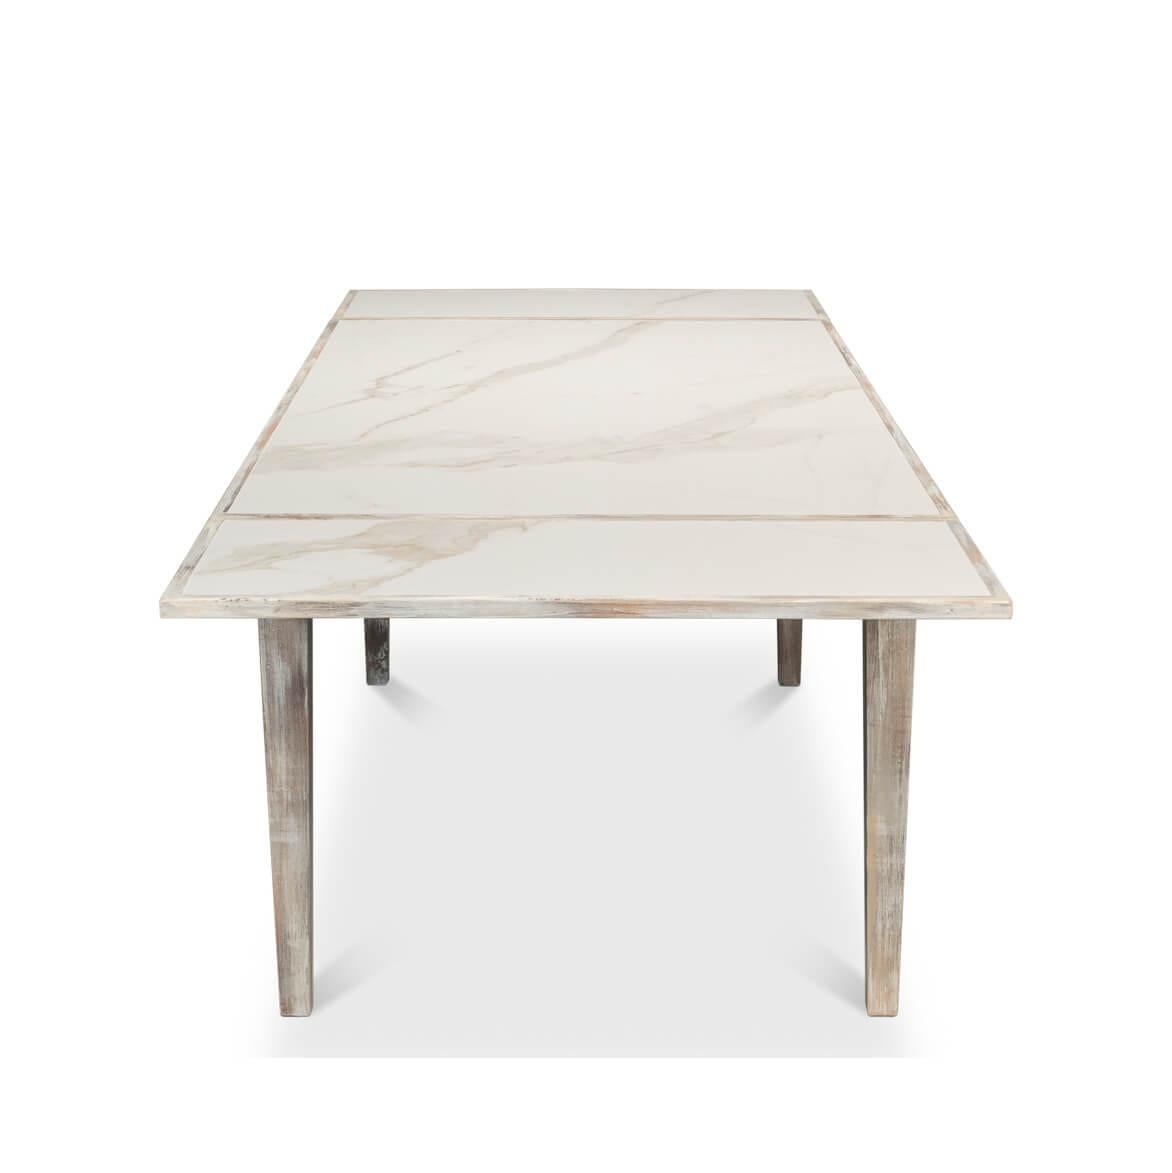 Porcelain Gray Wash Italian Draw Leaf Table For Sale